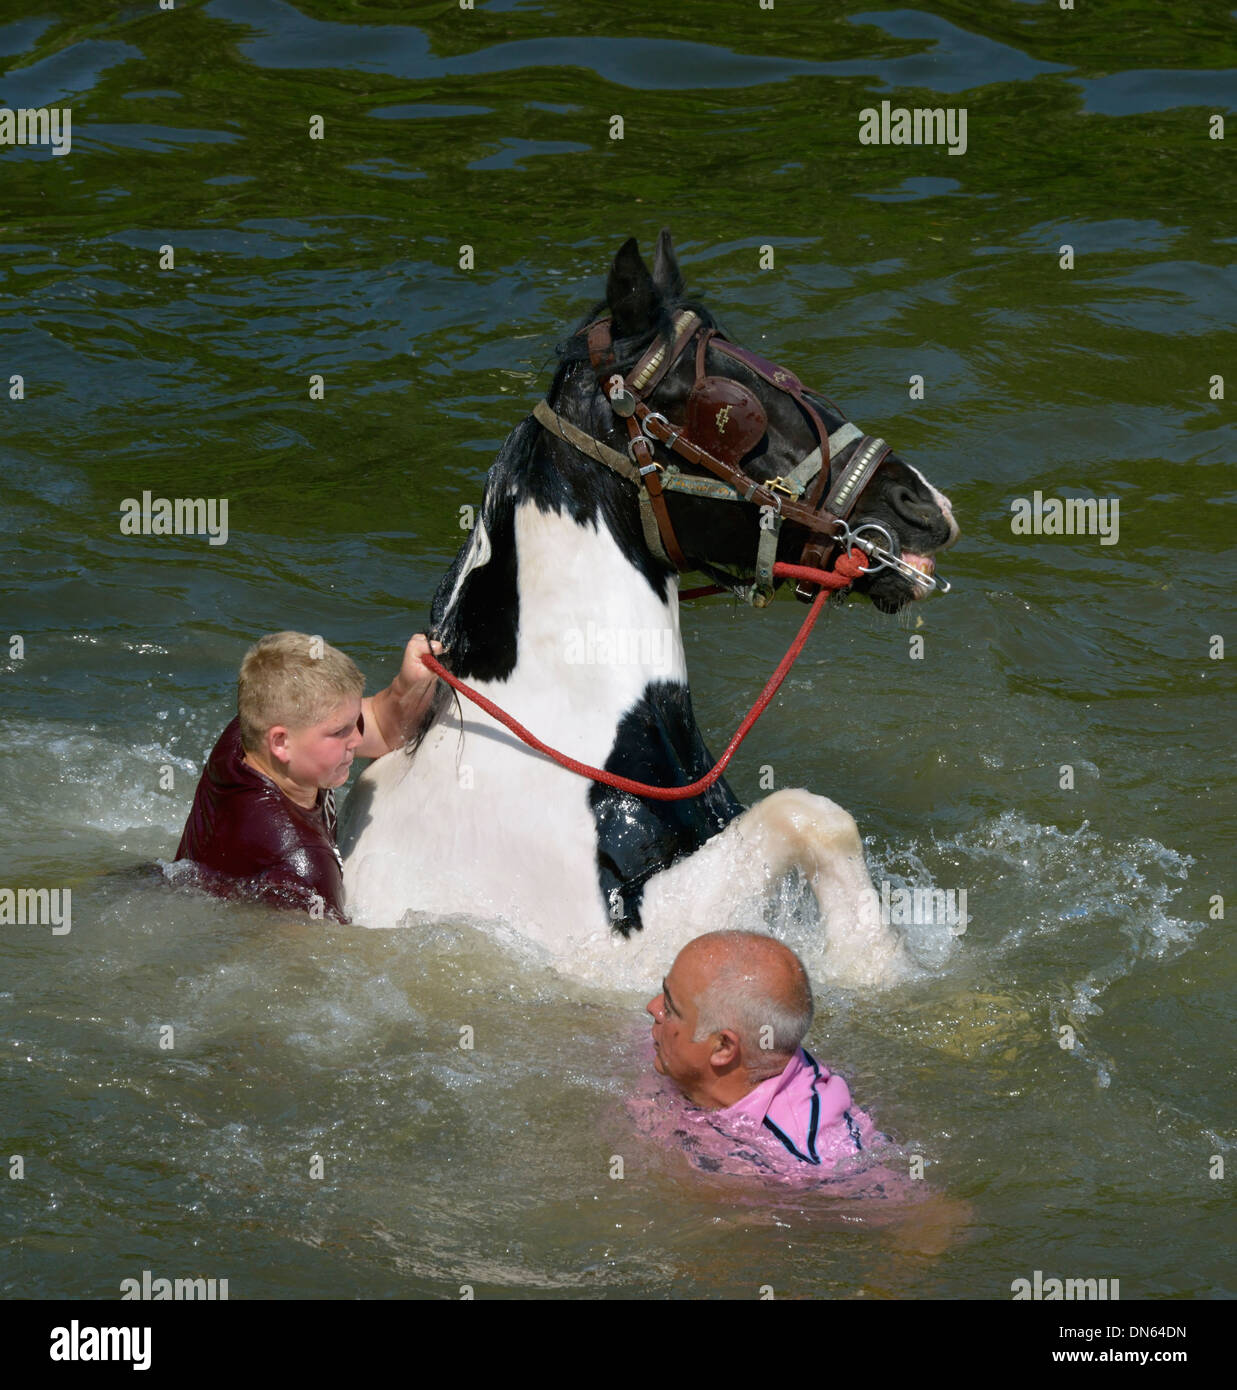 Gypsy travellers with horse in River Eden. Appleby Horse Fair, Appleby-in-Westmorland, Cumbria, England, United Kingdom, Europe. Stock Photo